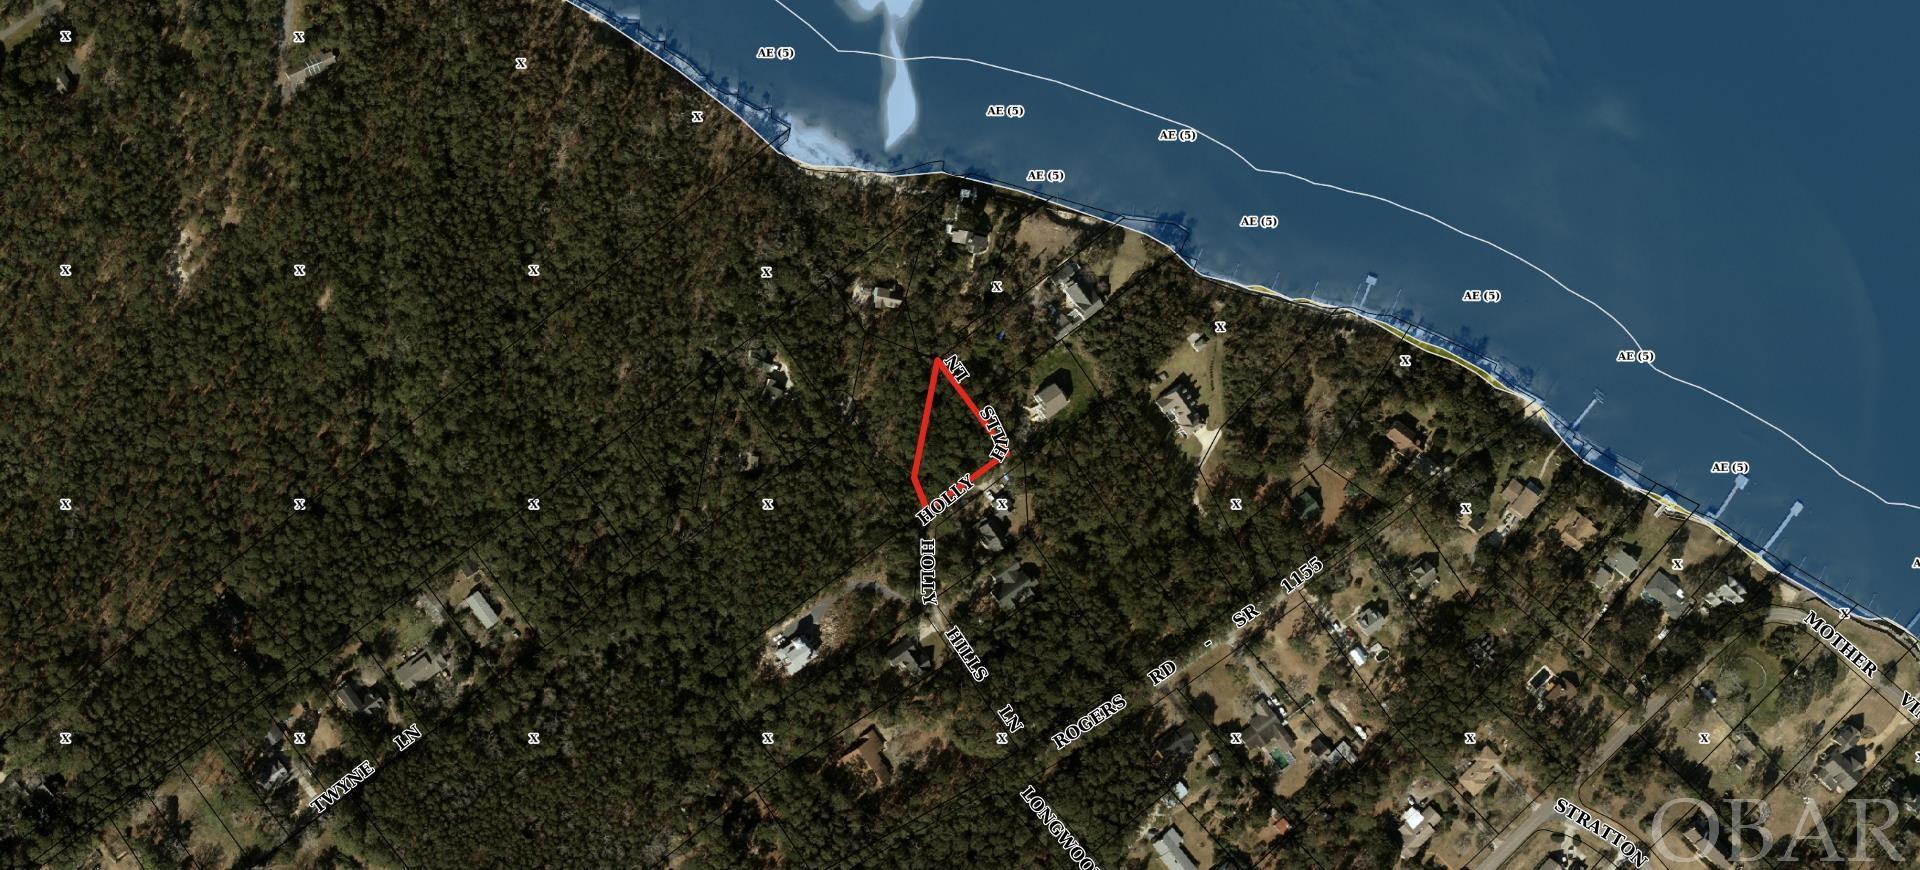 This lot is a gem! It has sound views while being one of the highest properties on Roanoke Island. It is located in a peaceful quiet neighborhood with few houses and lots of trees, and a short walk or bike ride to all three schools in town. Owner also has 104 Holly Hills Ct and is willing to sell both at a discounted price.